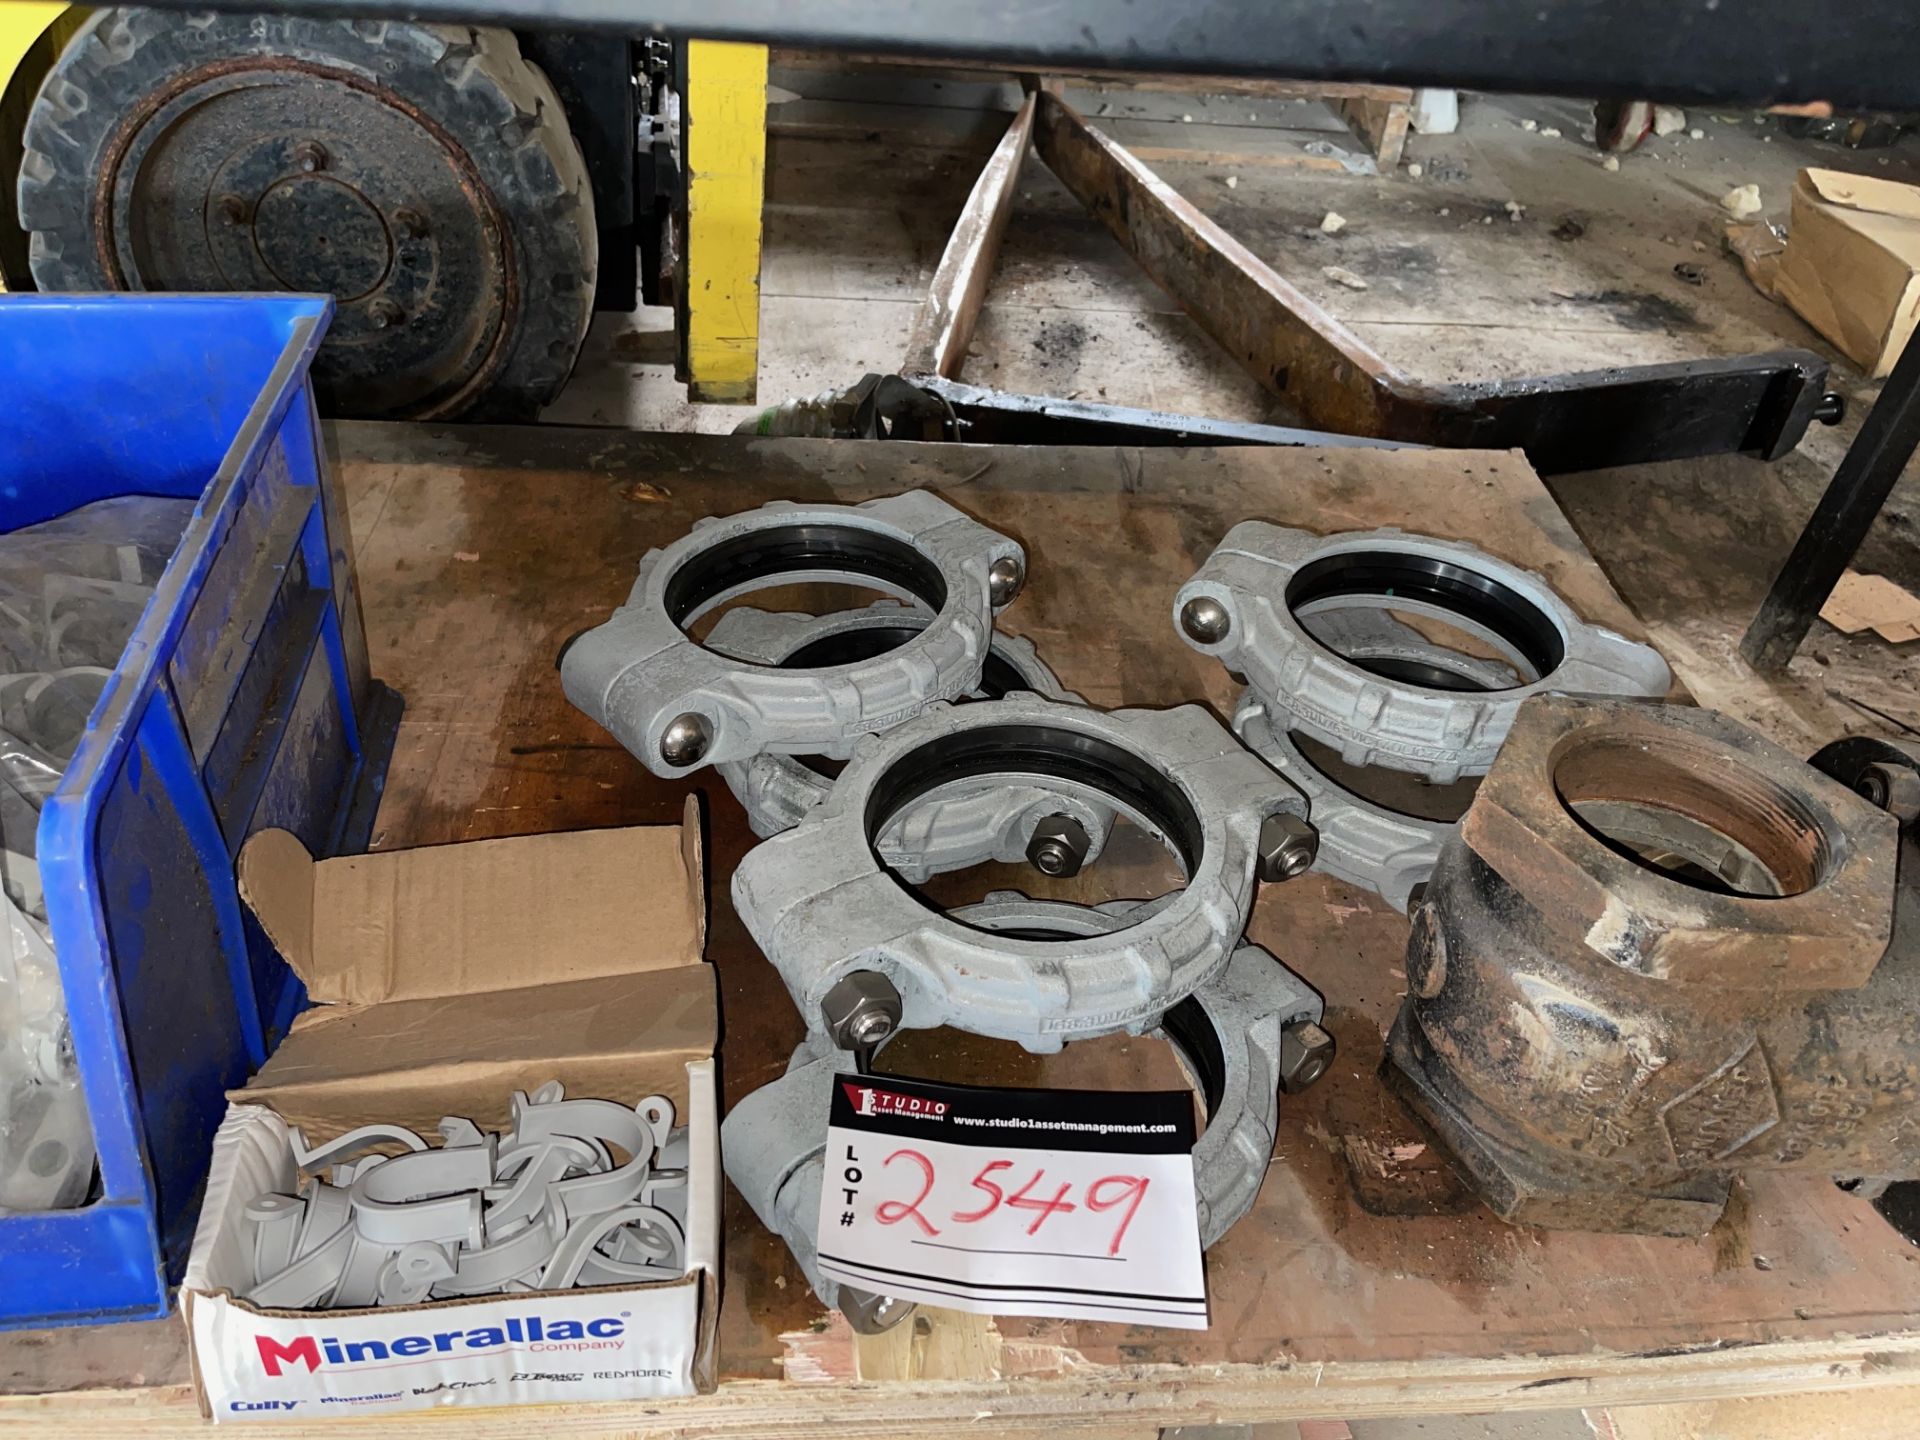 6” GALVANIZED VICTAULIC JOINERS WITH SS HARDWARE (6), JENKINS 4” GATE VALVE, 200 PSI WOG, MOD1255,